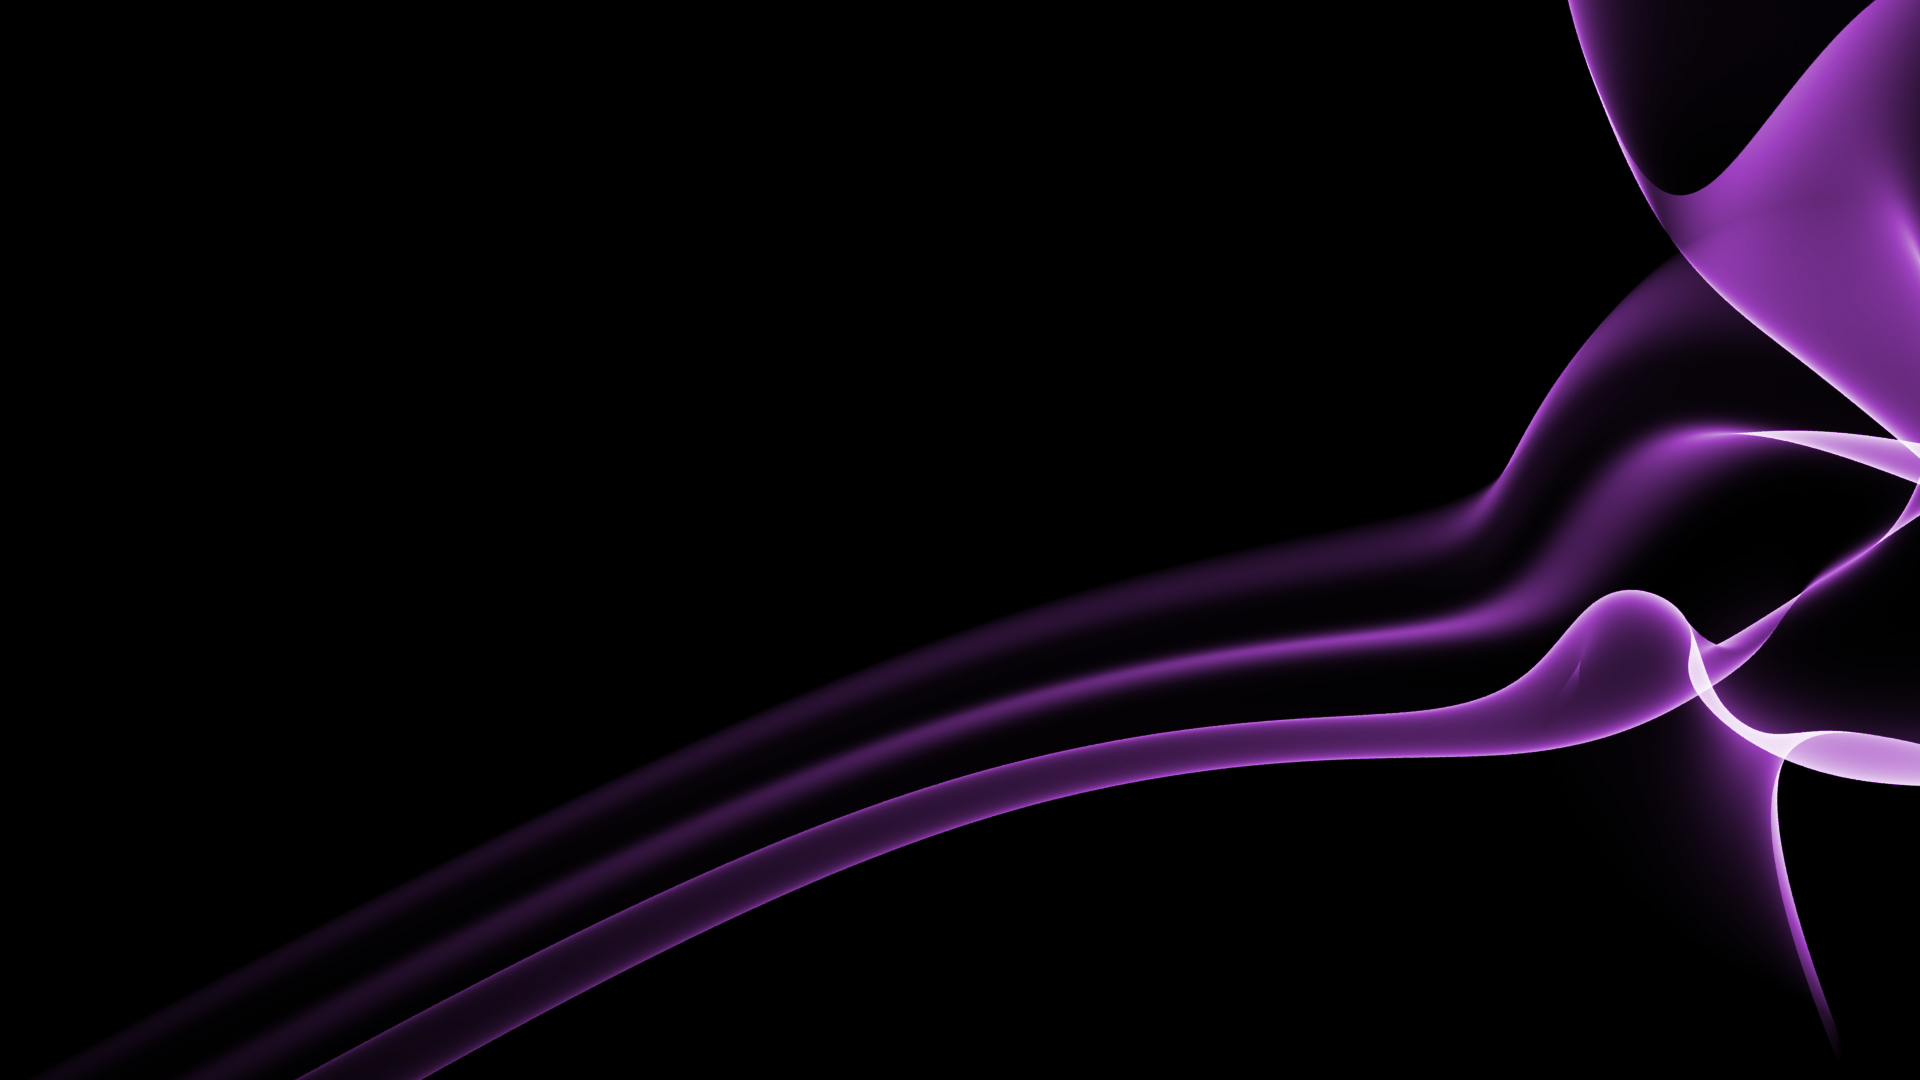 Abstract background waves. Black and purple abstract background for  wallpaper or business card - Stock Image - Everypixel